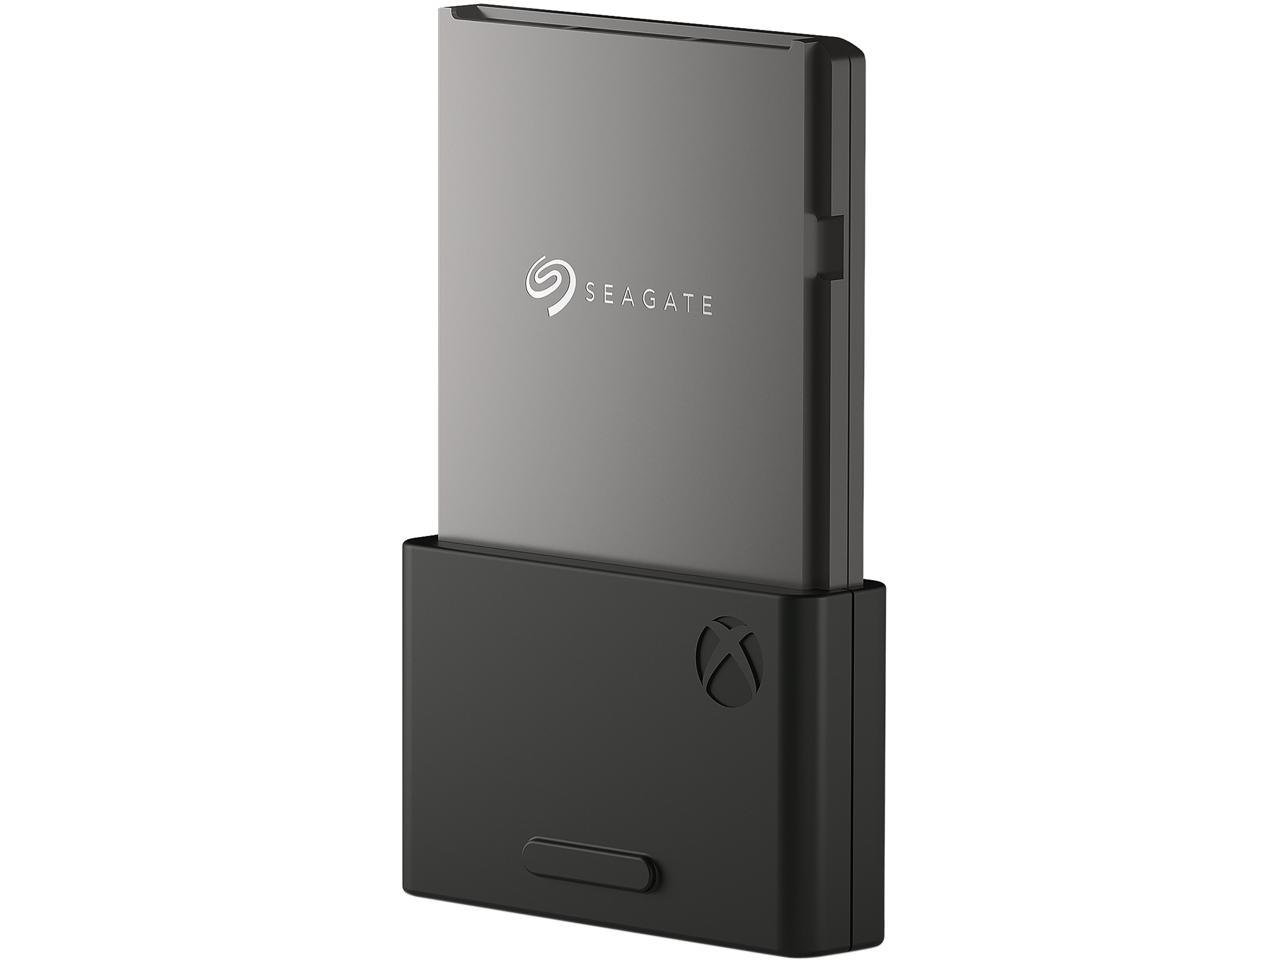 Xbox Series X|S Seagate Storage Expansion Card 1TB NVMe Expansion SSD 10% off ($198) Newegg